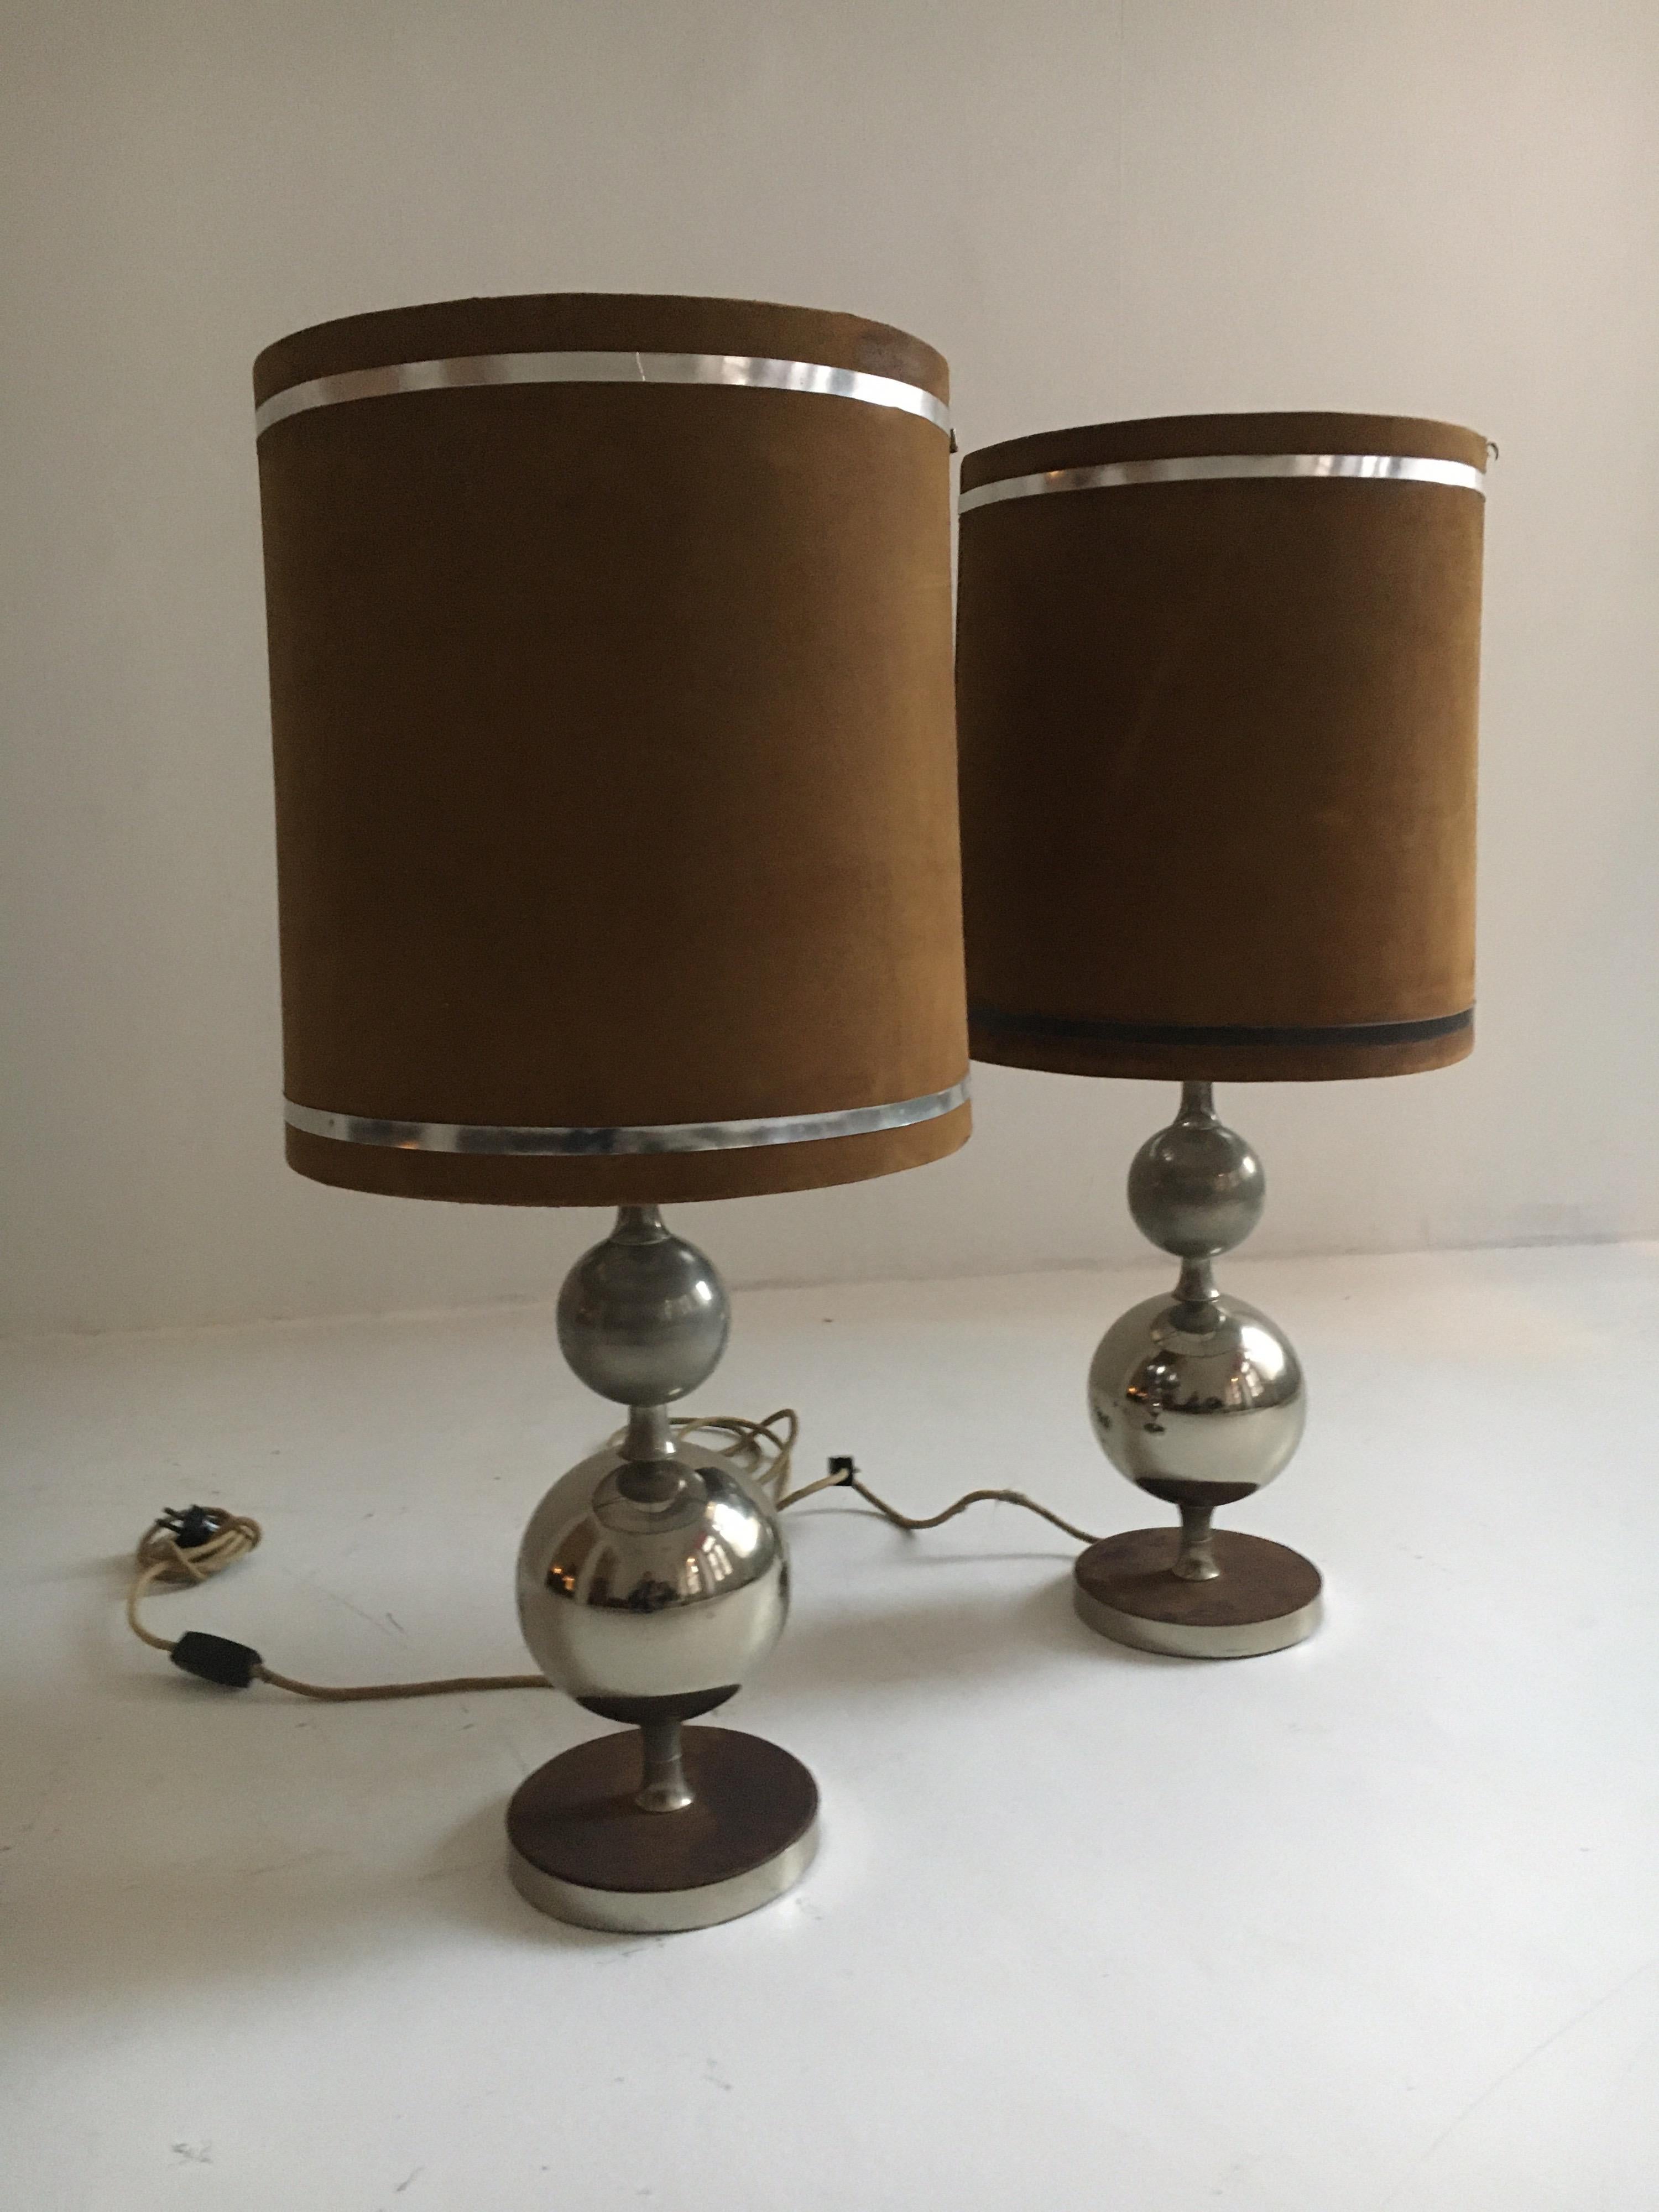 French Pierre Cardin Oversized Chrome and Suede Table Lamps, France, 1970s For Sale